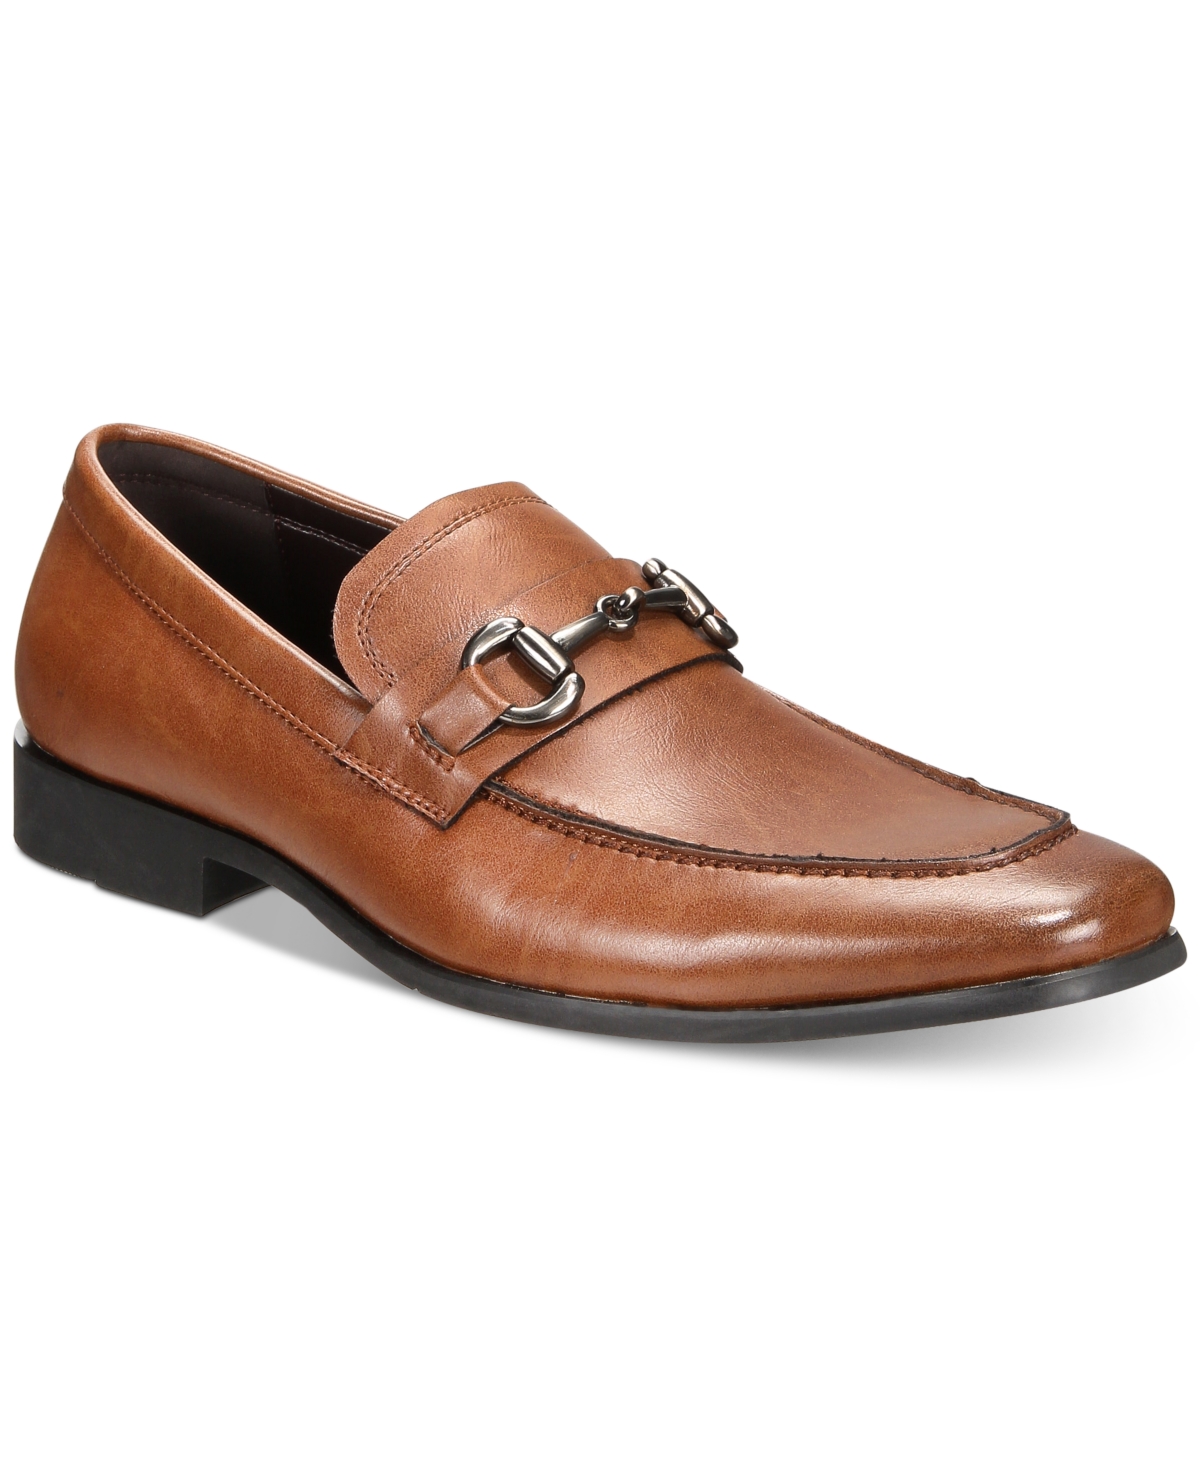 by Kenneth Cole Men's Stay Loafer - Cognac